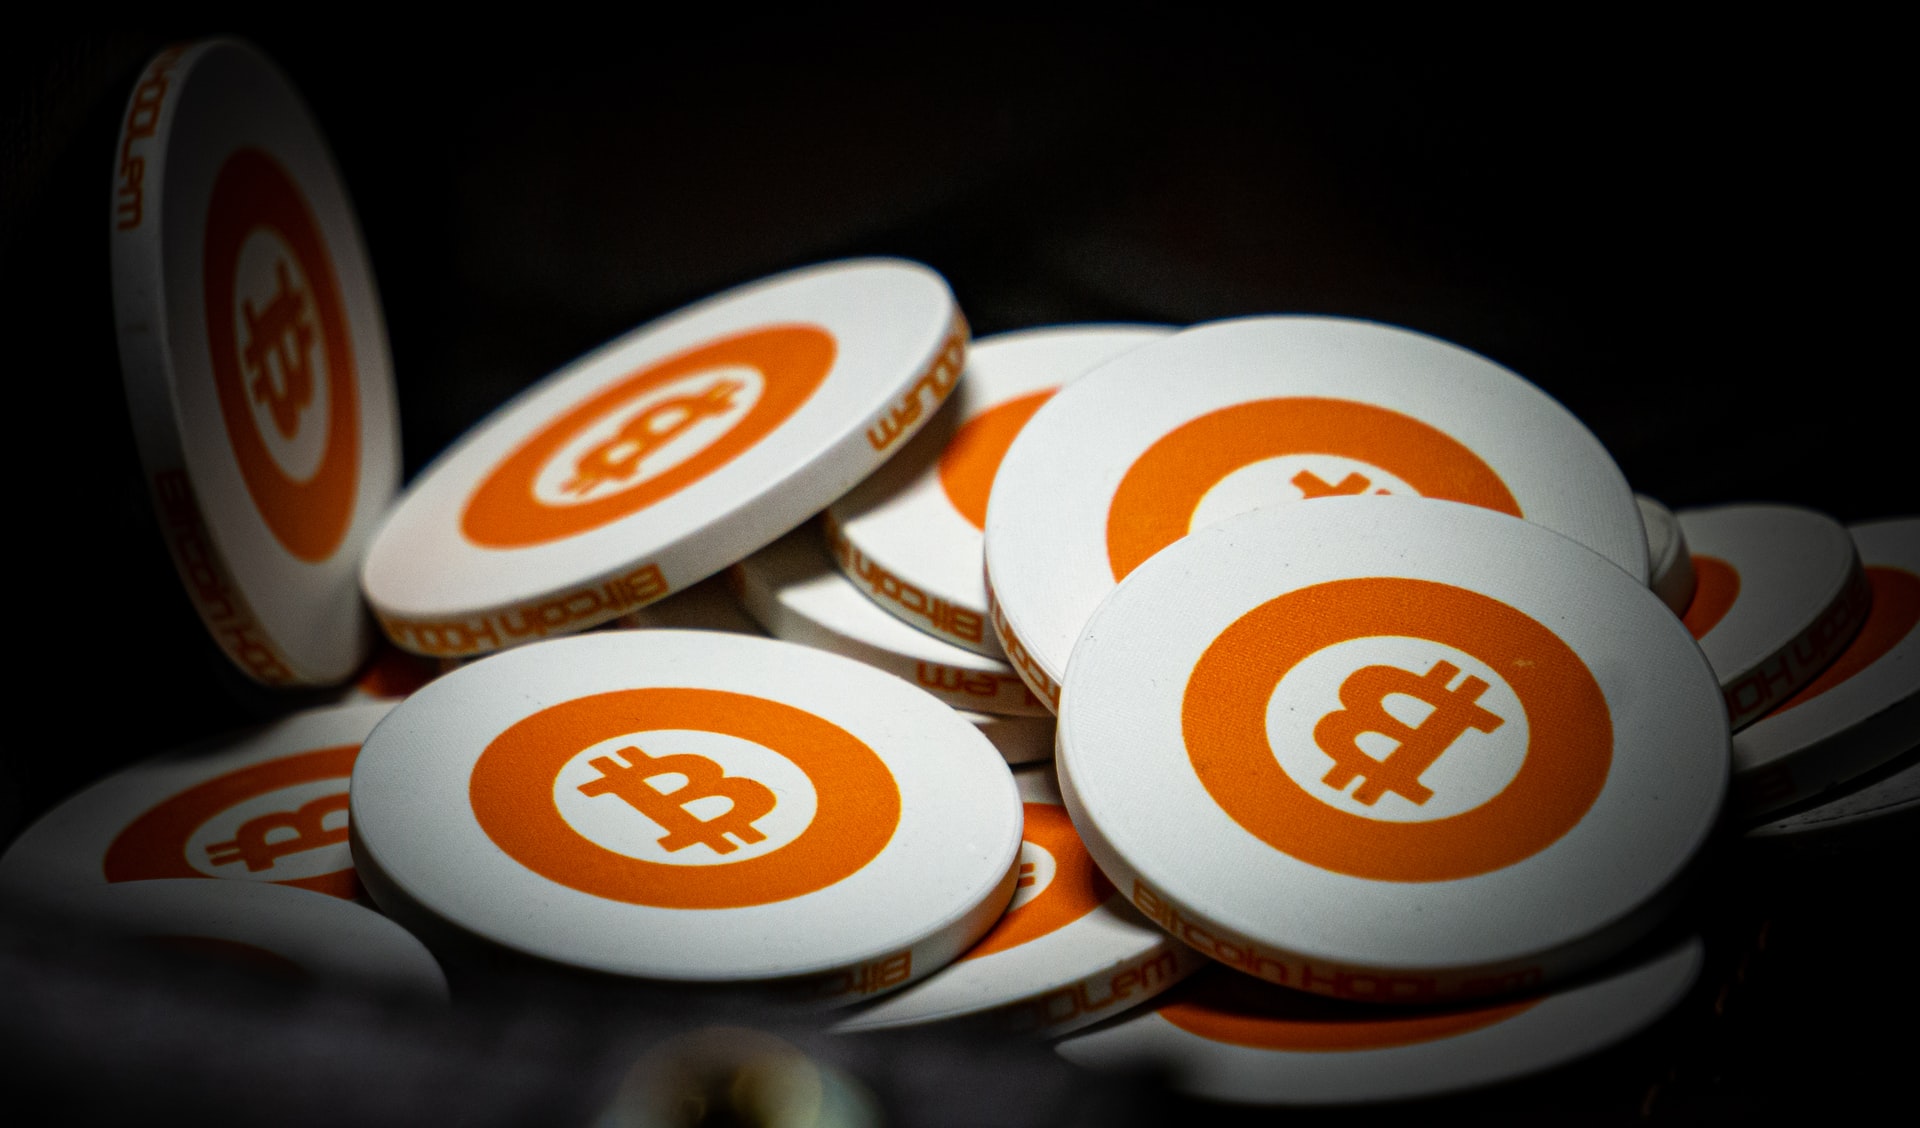 An image of white and orange bitcoins